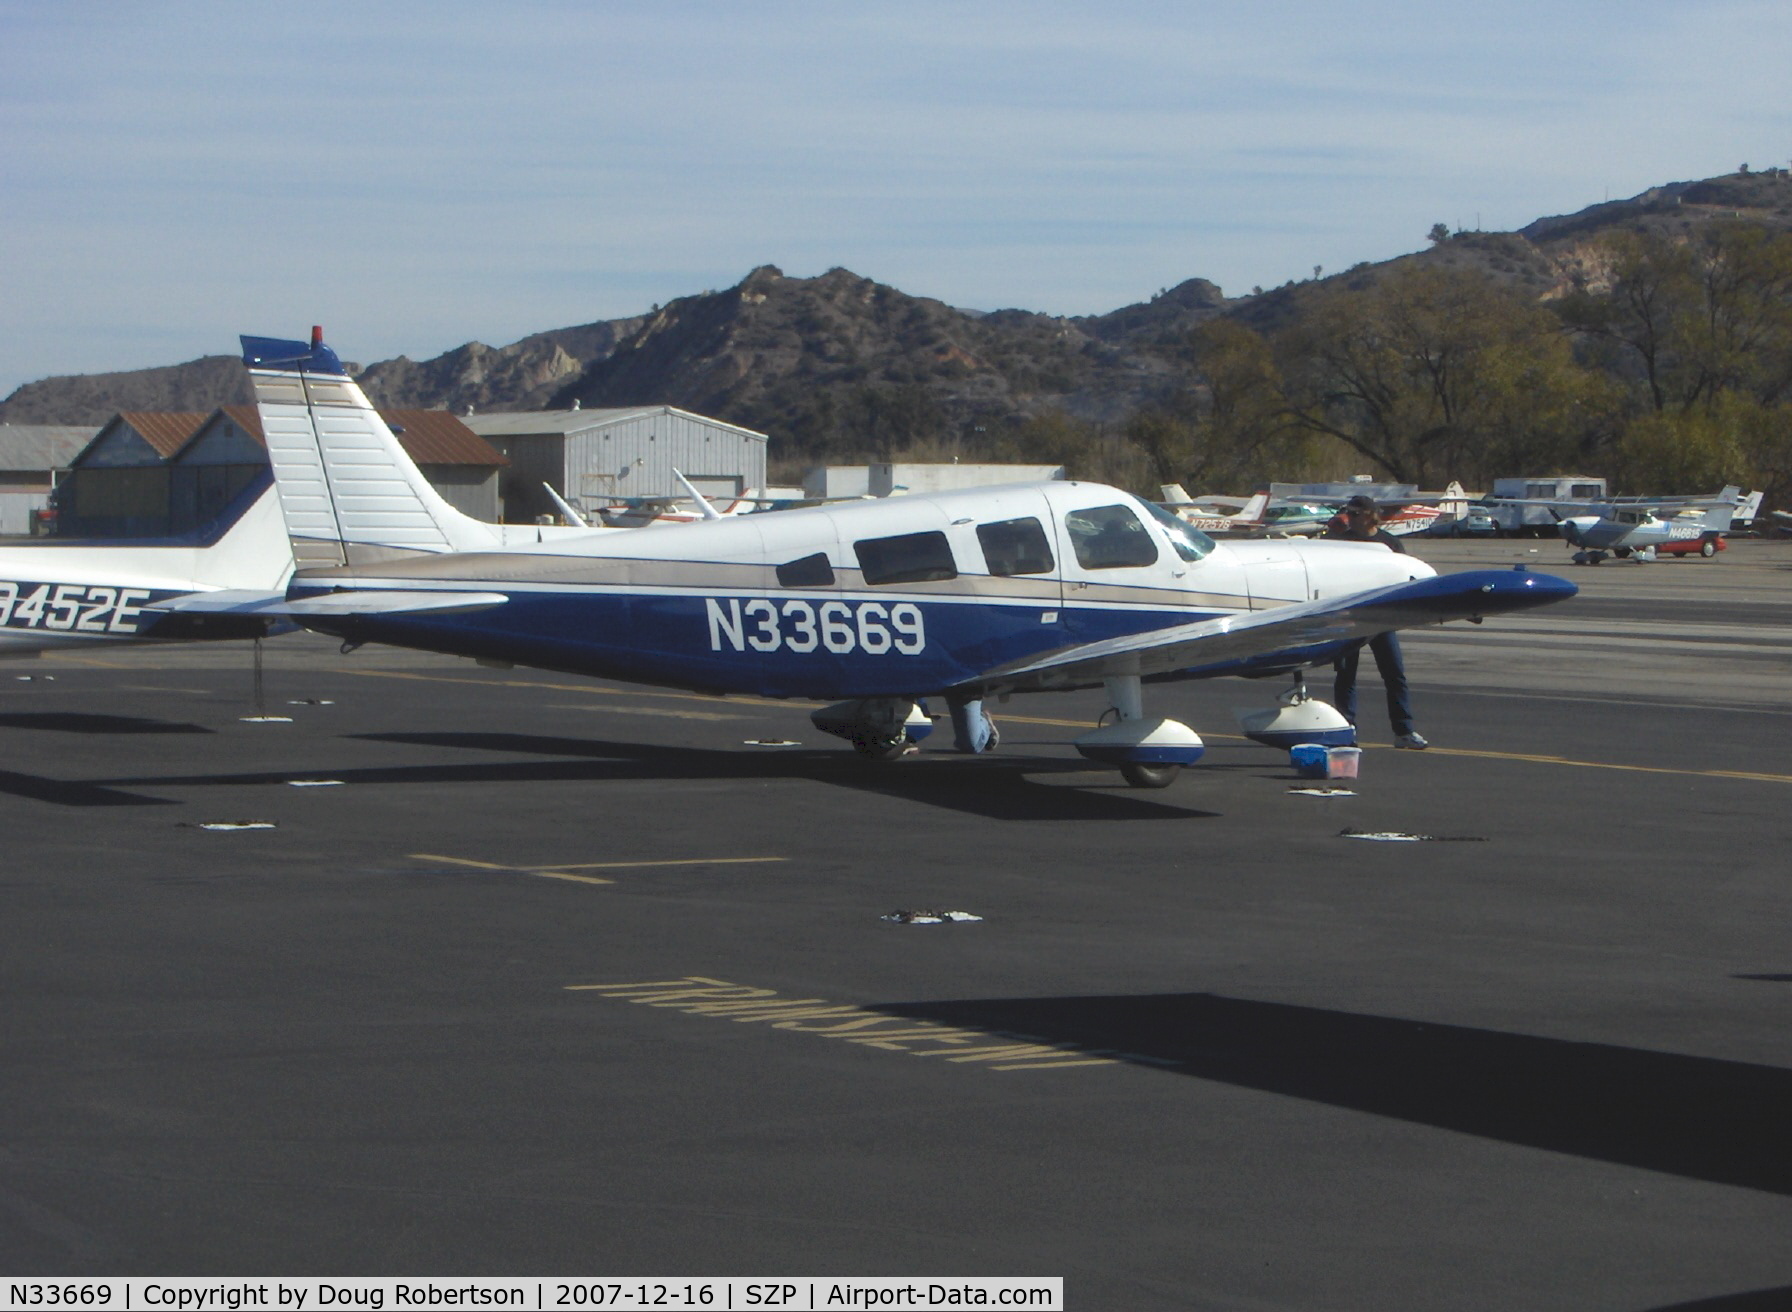 N33669, 1975 Piper PA-32-300 Cherokee Six C/N 32-7540110, 1975 Piper PA-32-300 CHEROKEE SIX, Lycoming TIO-540-K1A5, 300 Hp